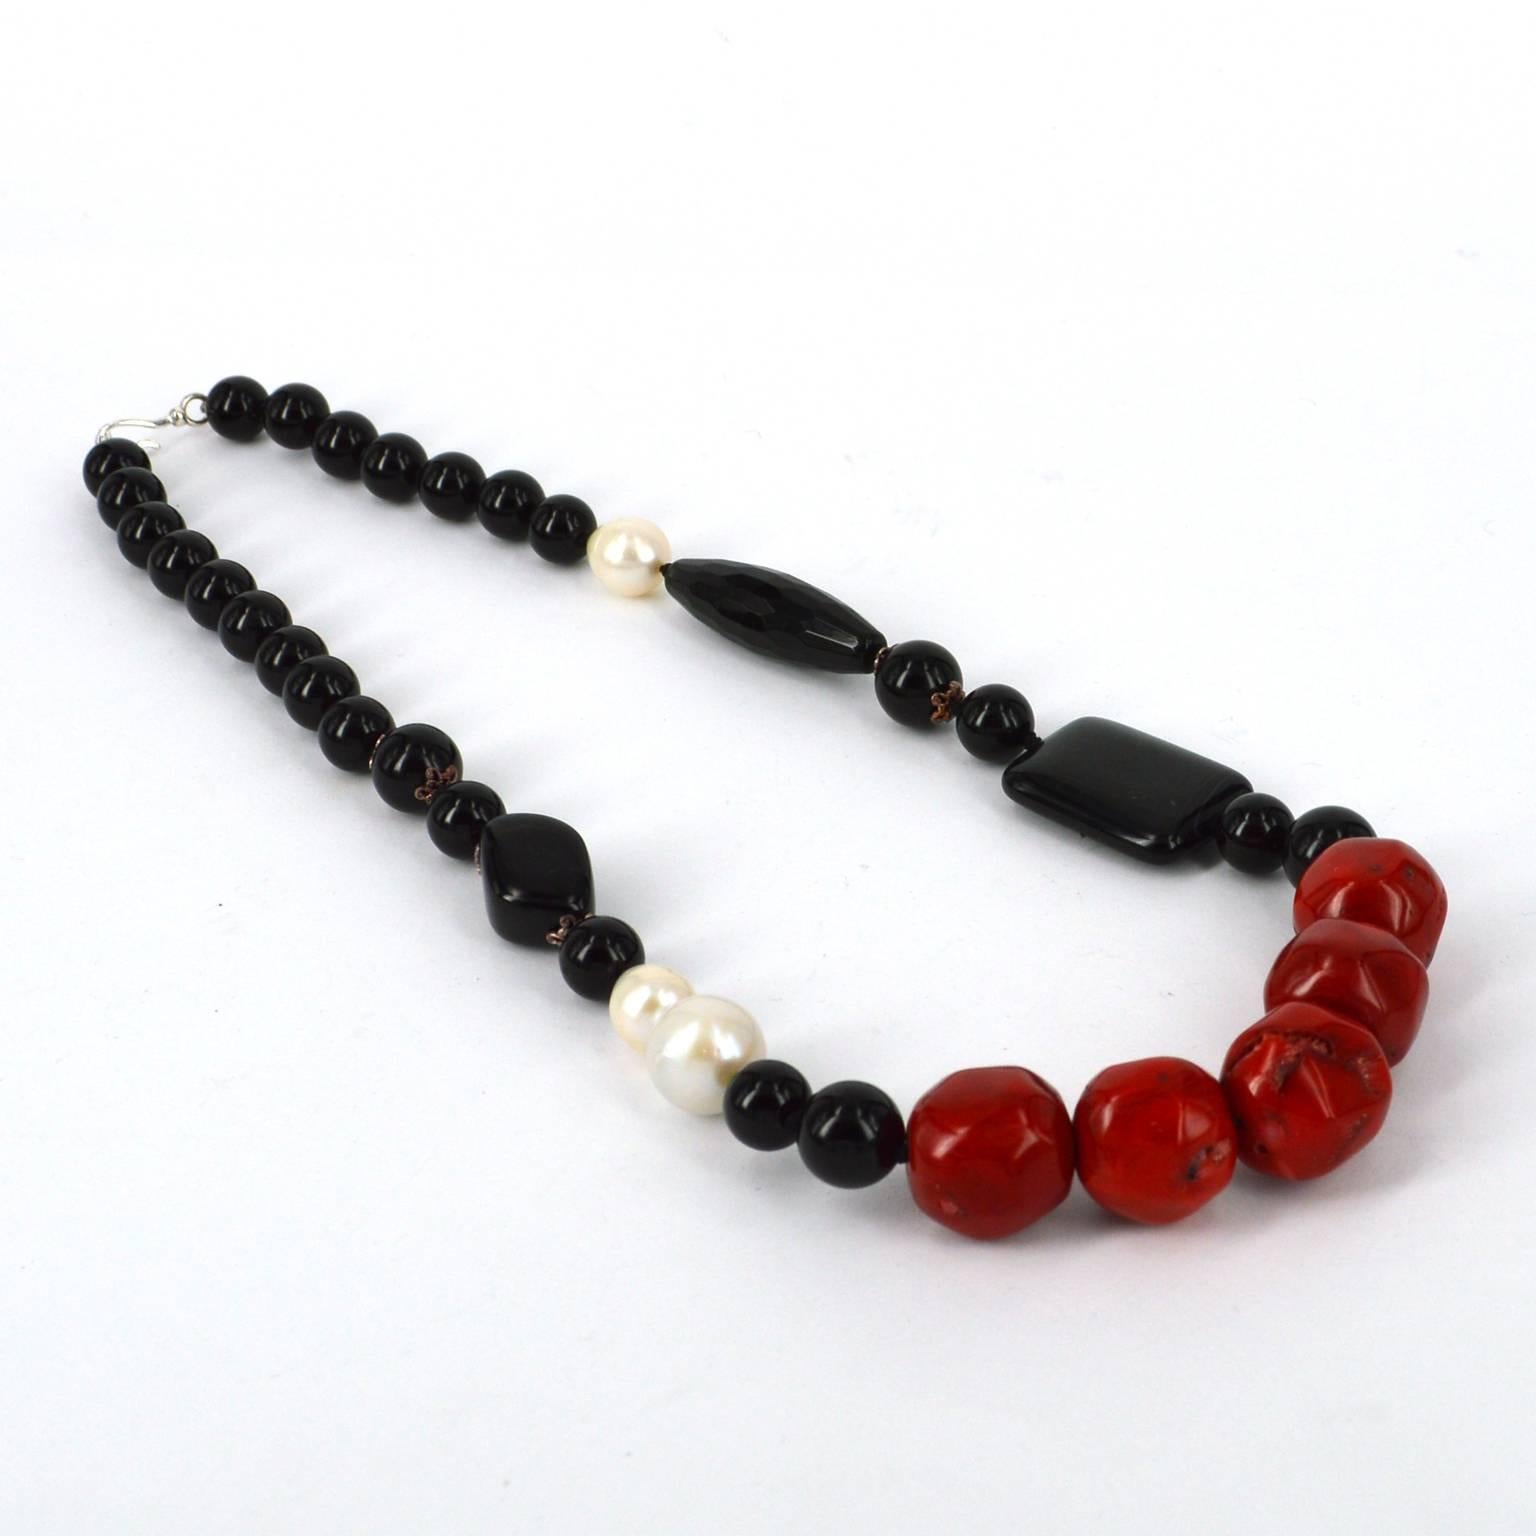 Classic colour combination of Black Red and White with Onyx, Agate, dyed red Bamboo Coral and Freshwater Pearls. Asymmetric pattern make for an interesting yet stylish combination.
Coral nuggets measure at 19mm.
Necklace is hand knotted on black